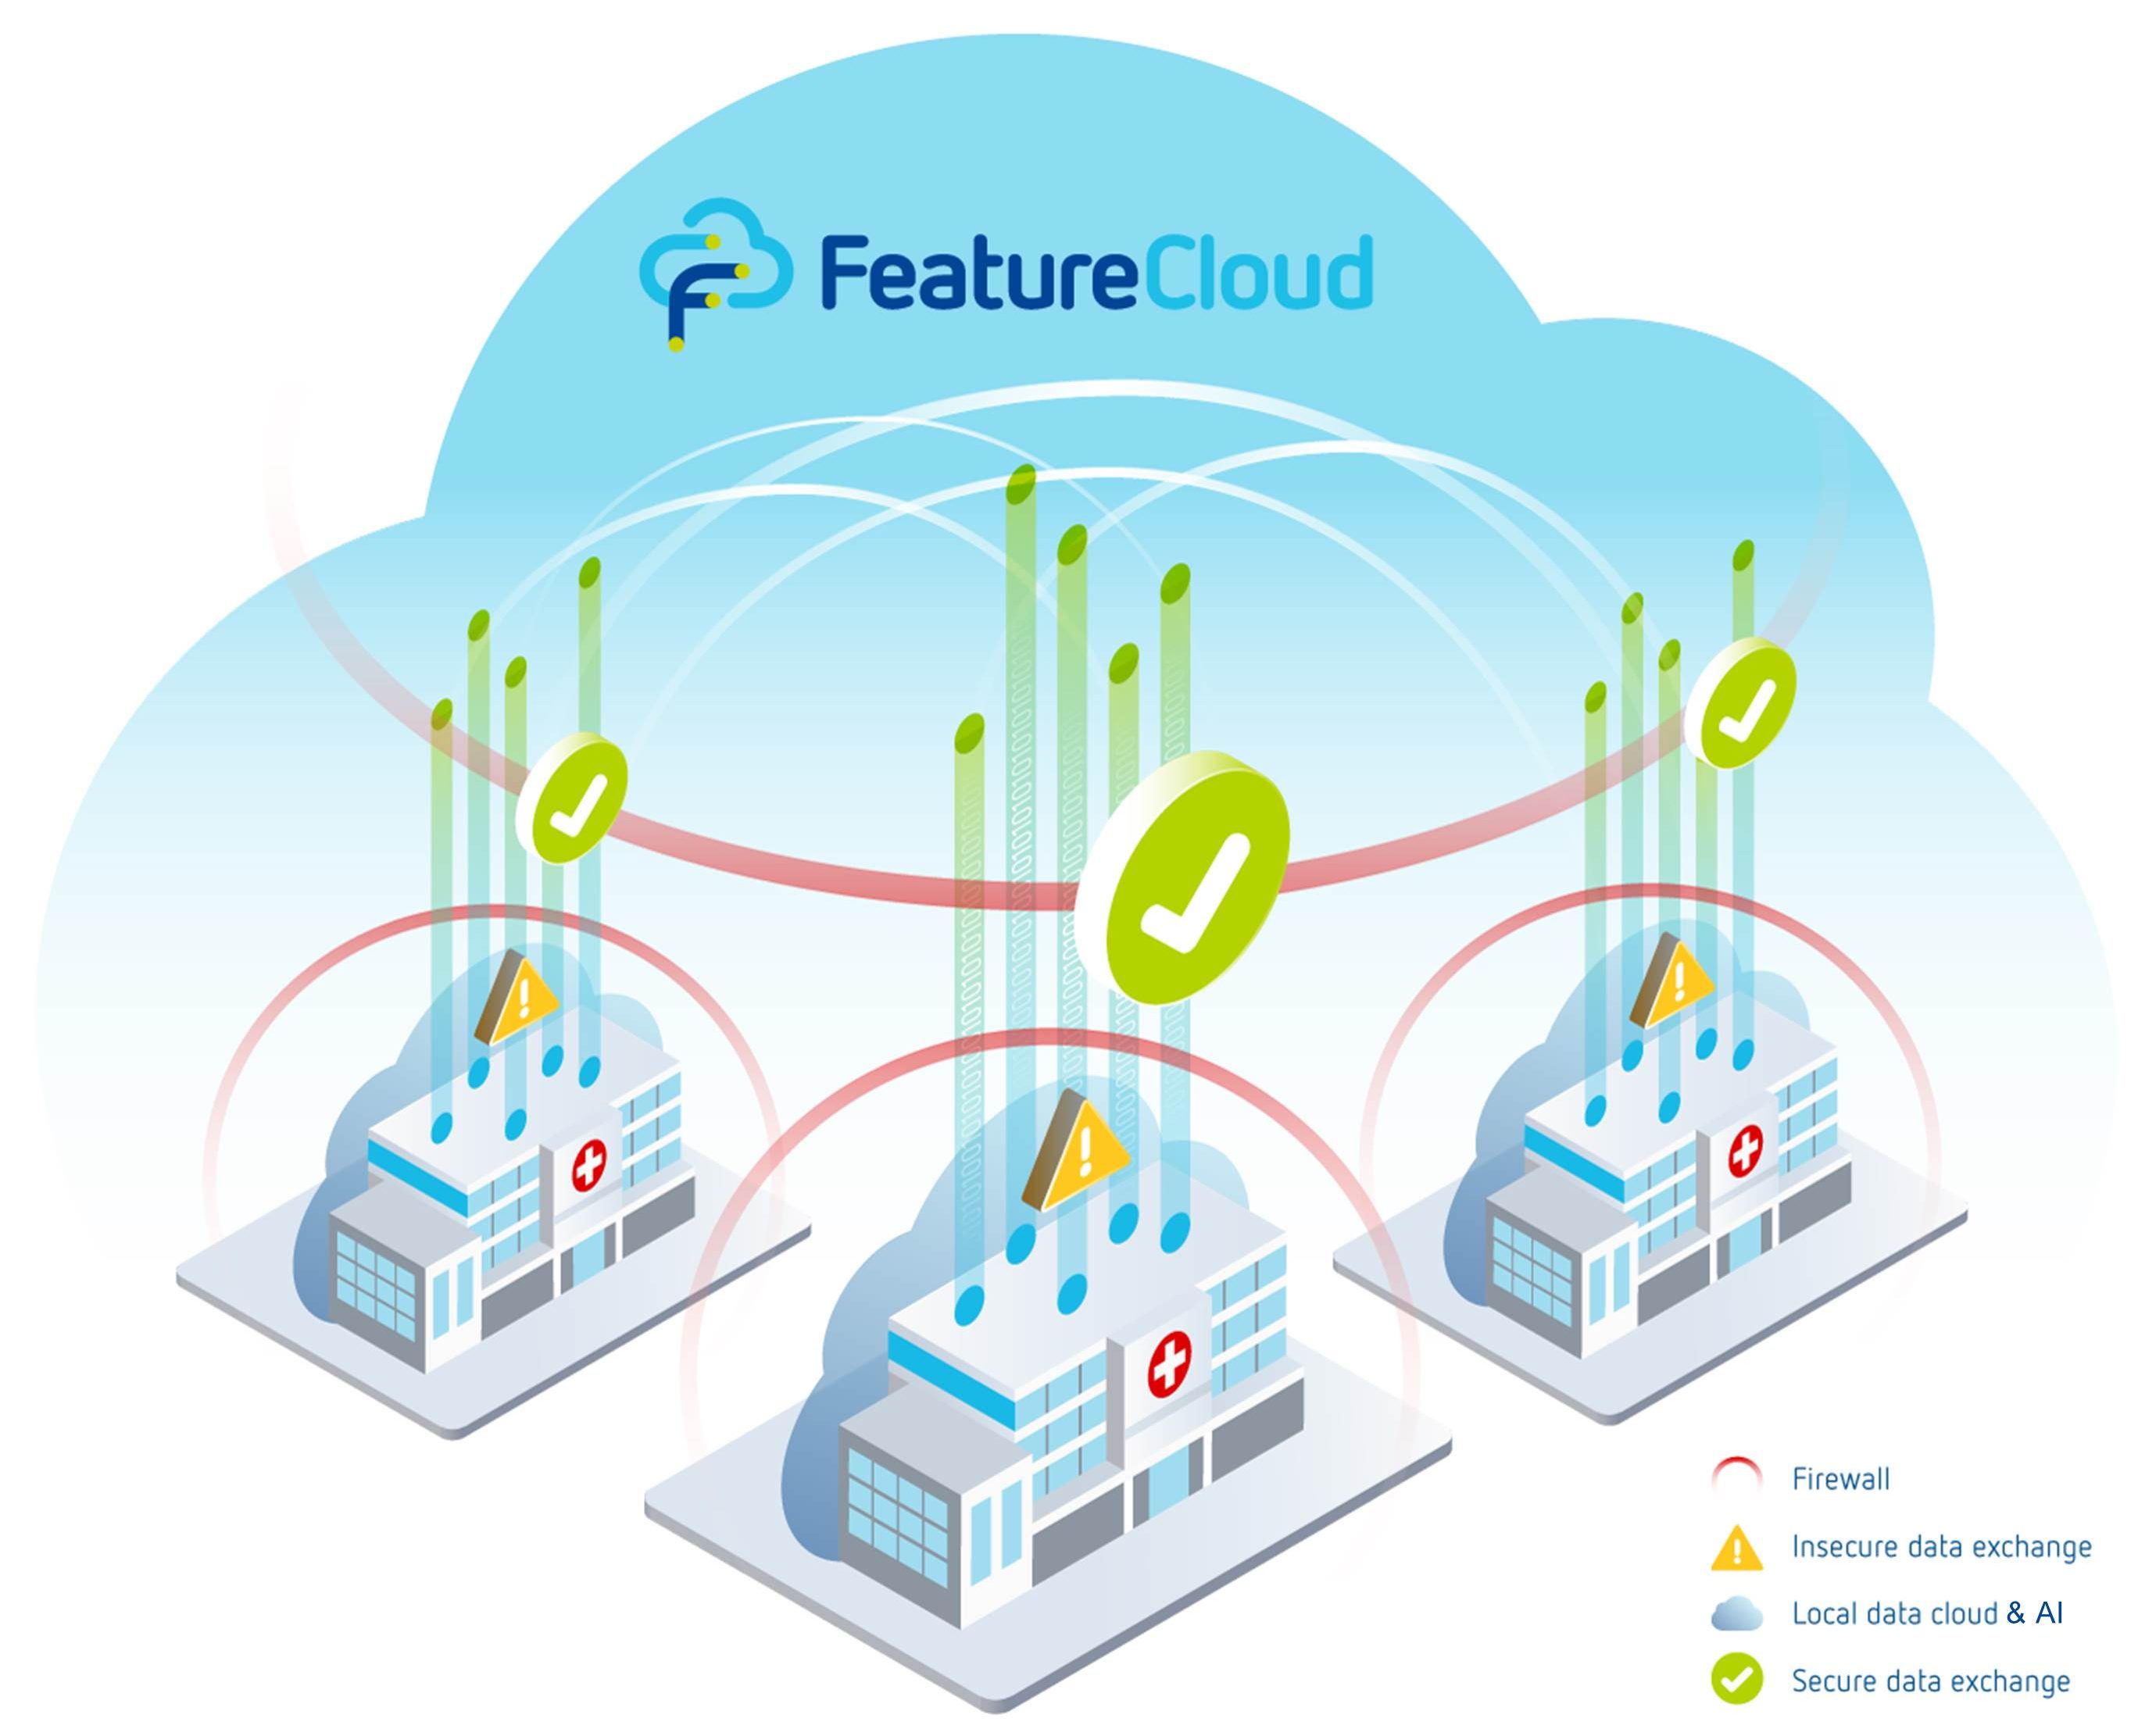 The FeatureCloud Vision